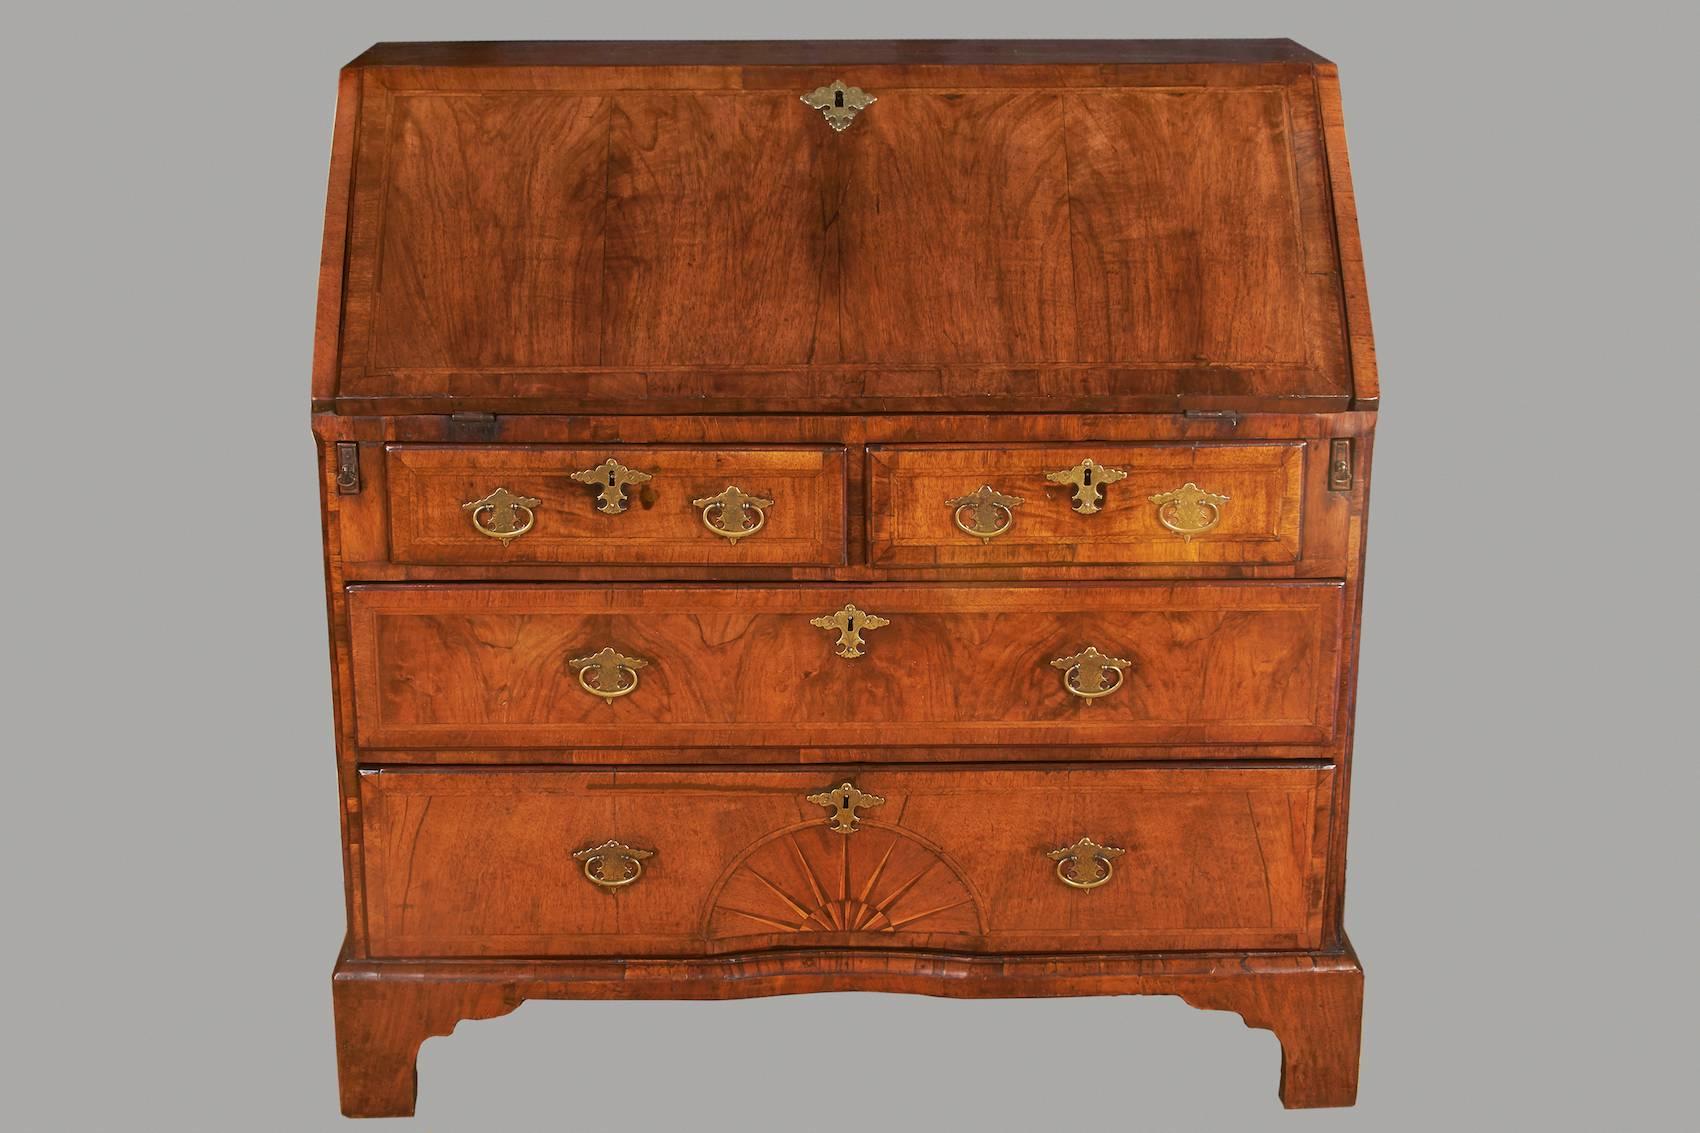 A fine George I period figured walnut bureau, the crossbanded chevron inlaid fall concealing a fitted interior, above two short and two long similarly inlaid and banded drawers, the bottom drawer with concave sunburst inlay, all supported on